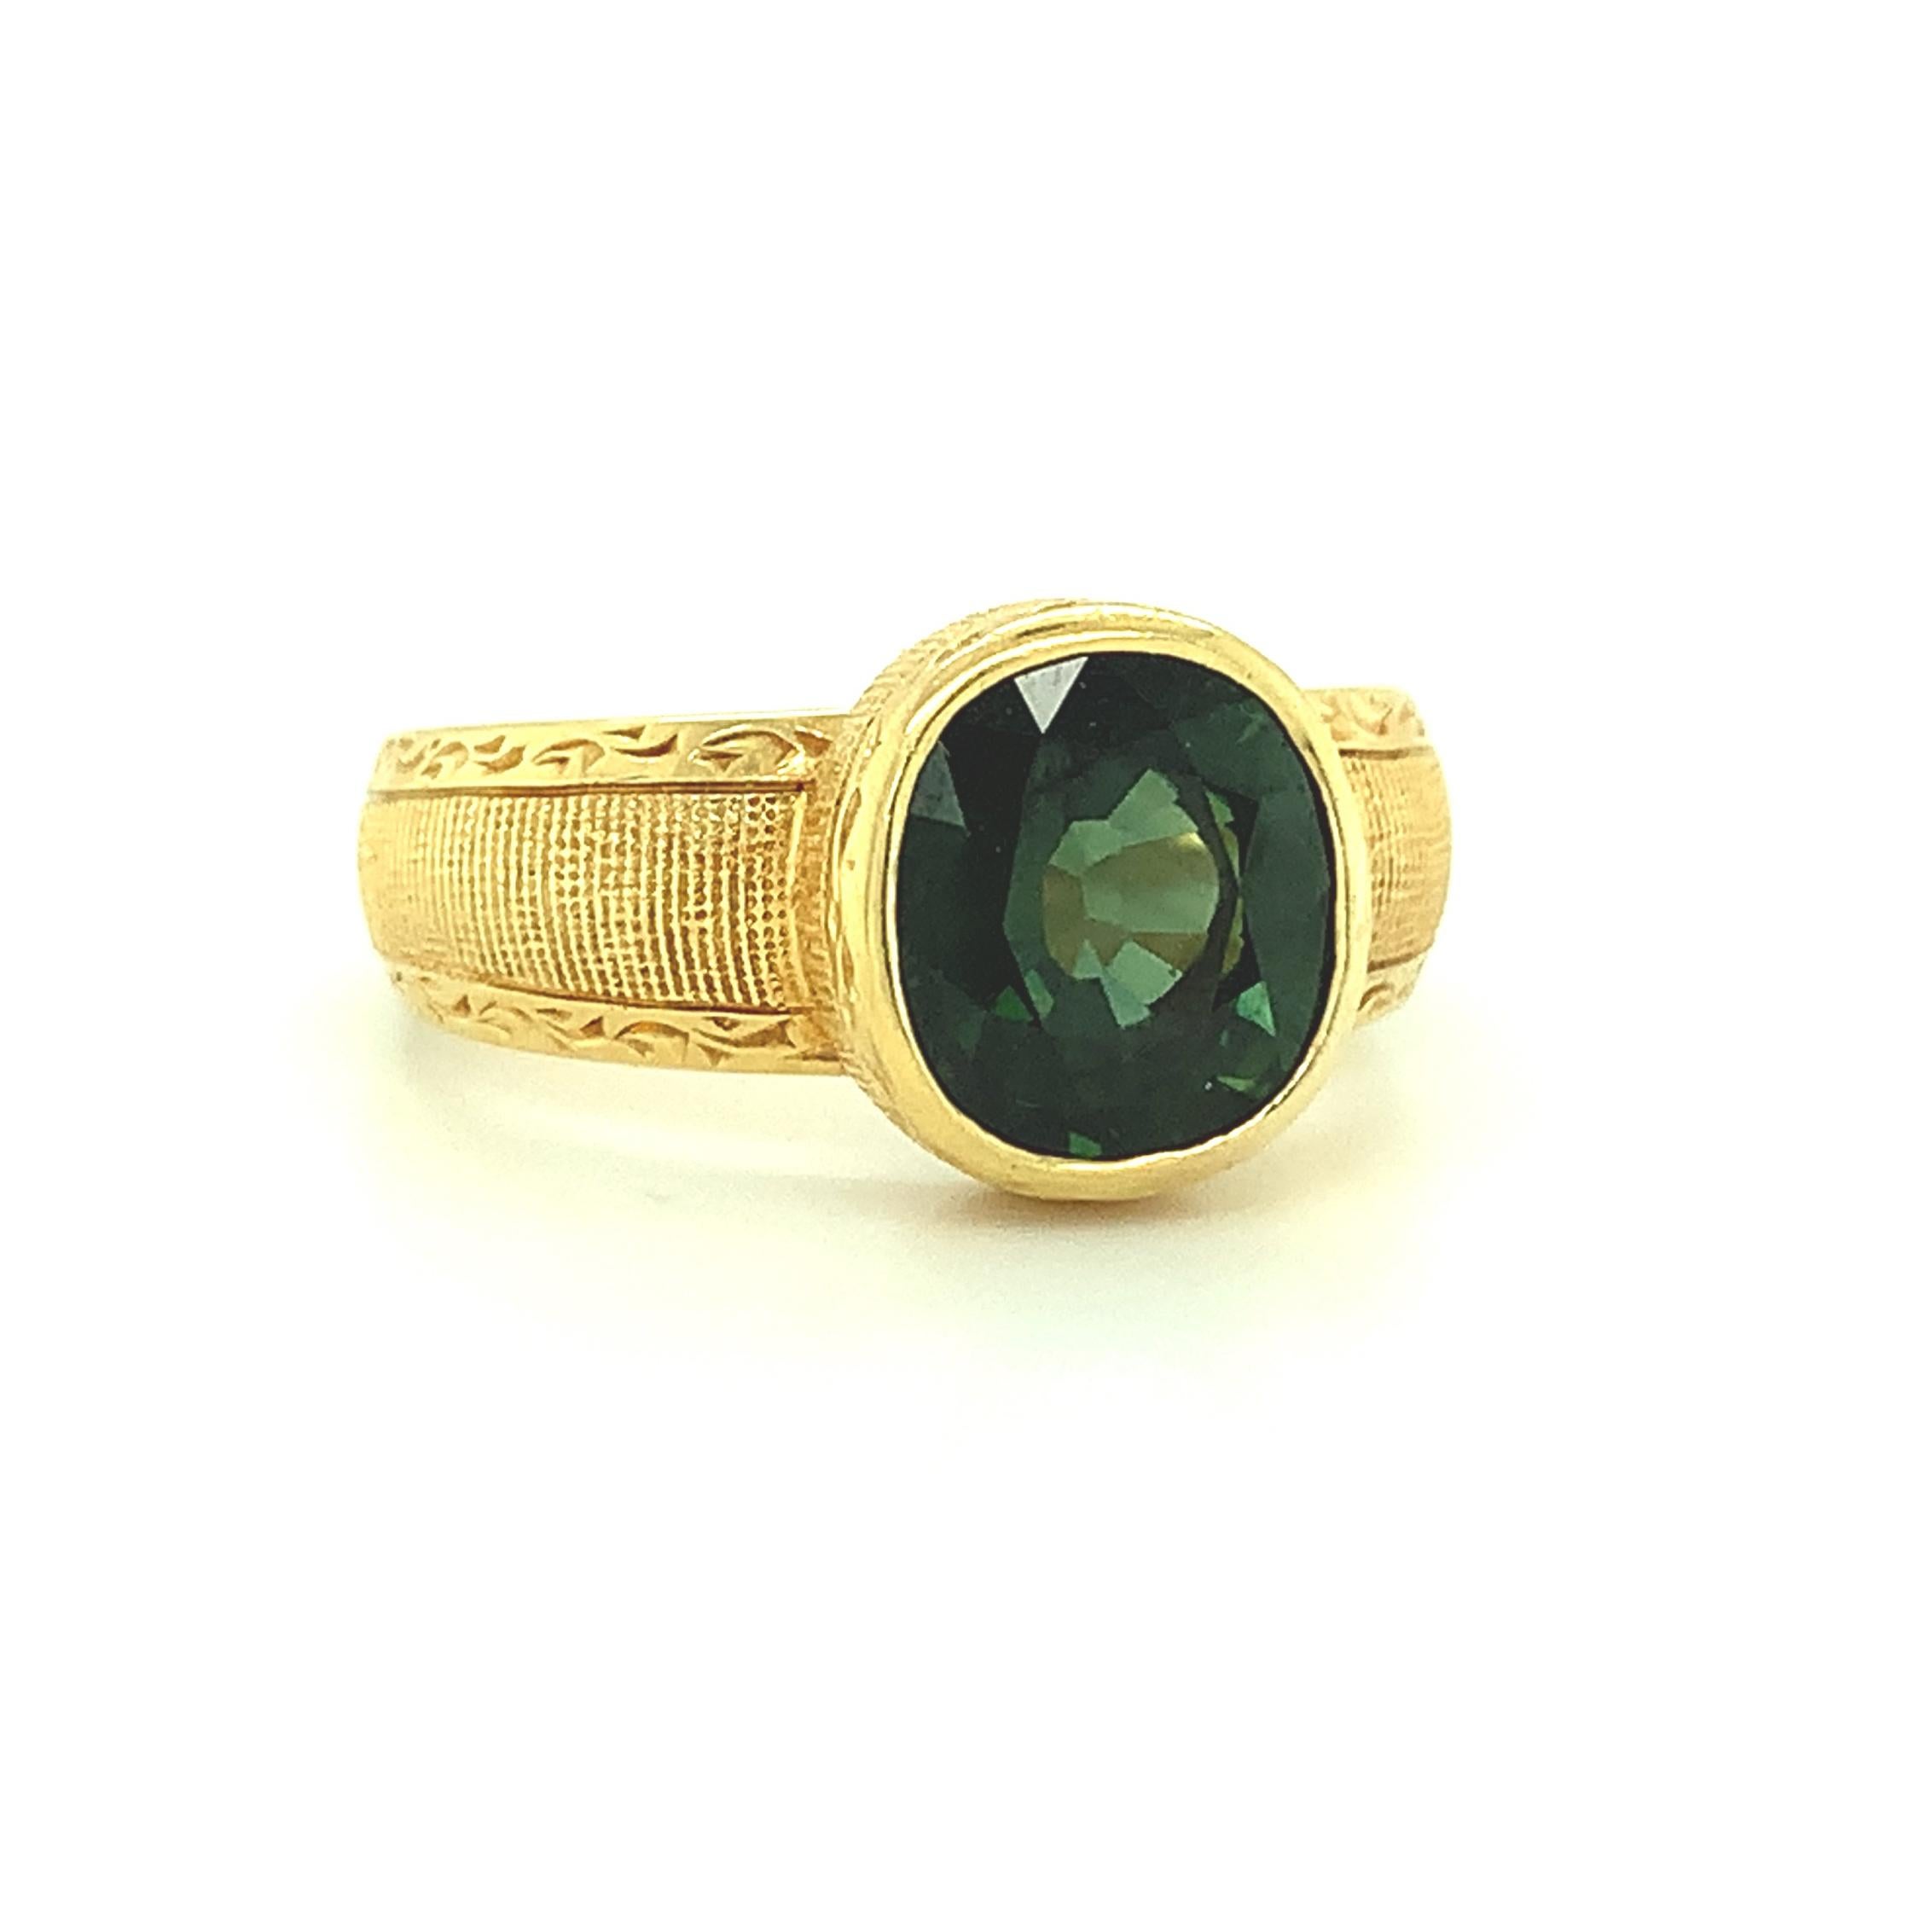 This handsome ring features a bright, 2.66 carat cushion cut green sapphire that has been set in a handmade 18k yellow gold bezel. The sapphire has a beautiful slightly bluish green color and sits low enough on the finger to make this a perfect ring